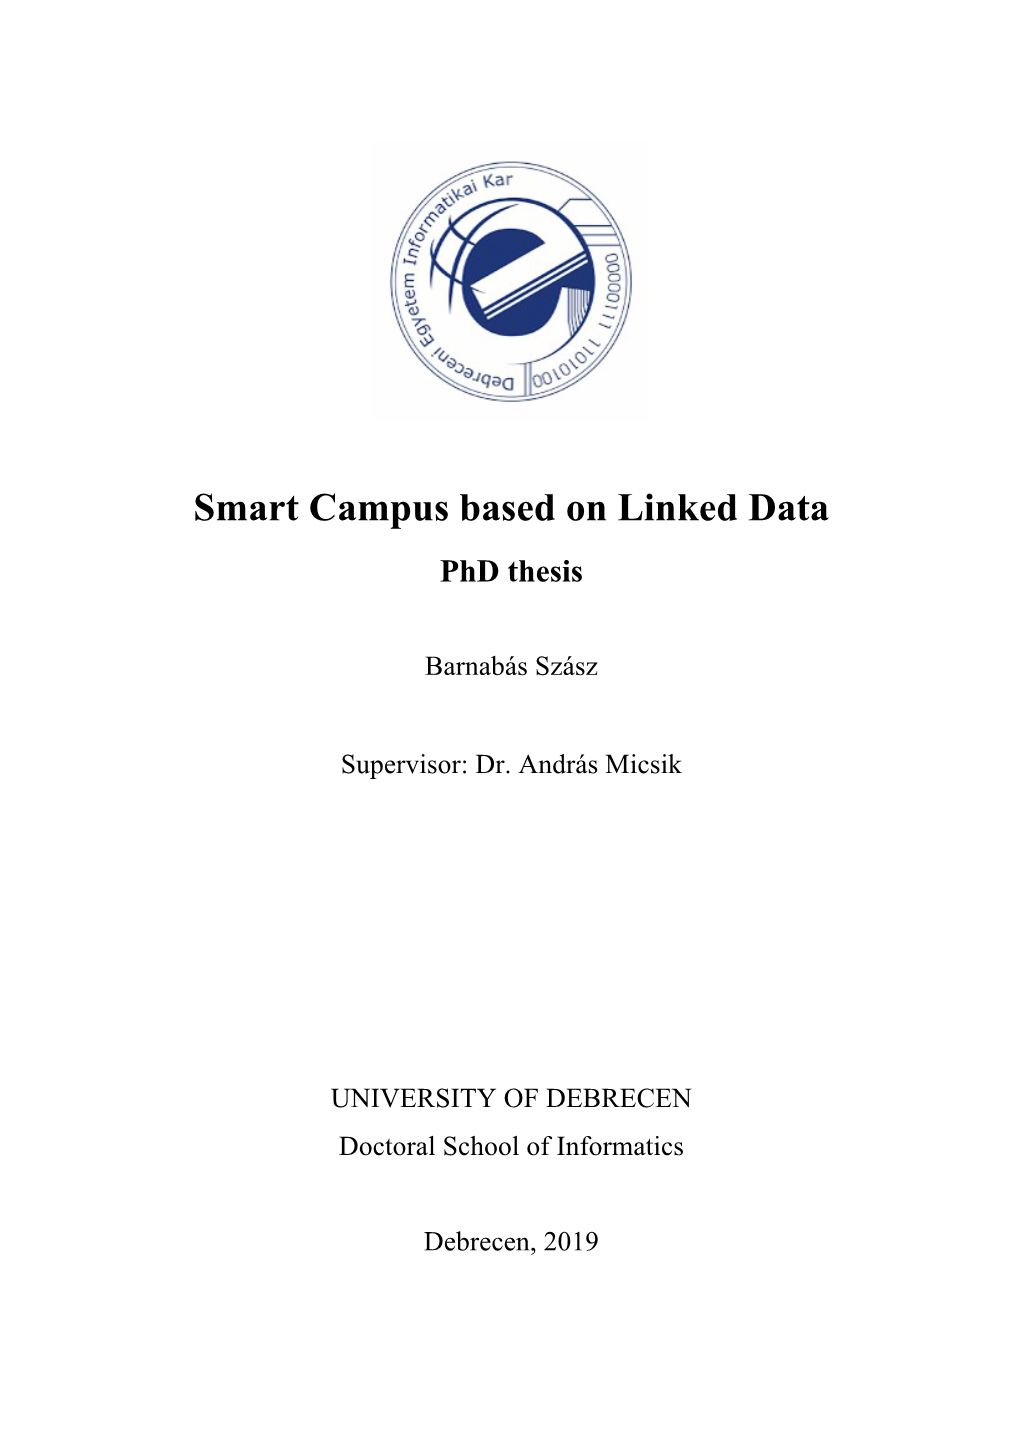 Smart Campus Based on Linked Data Phd Thesis